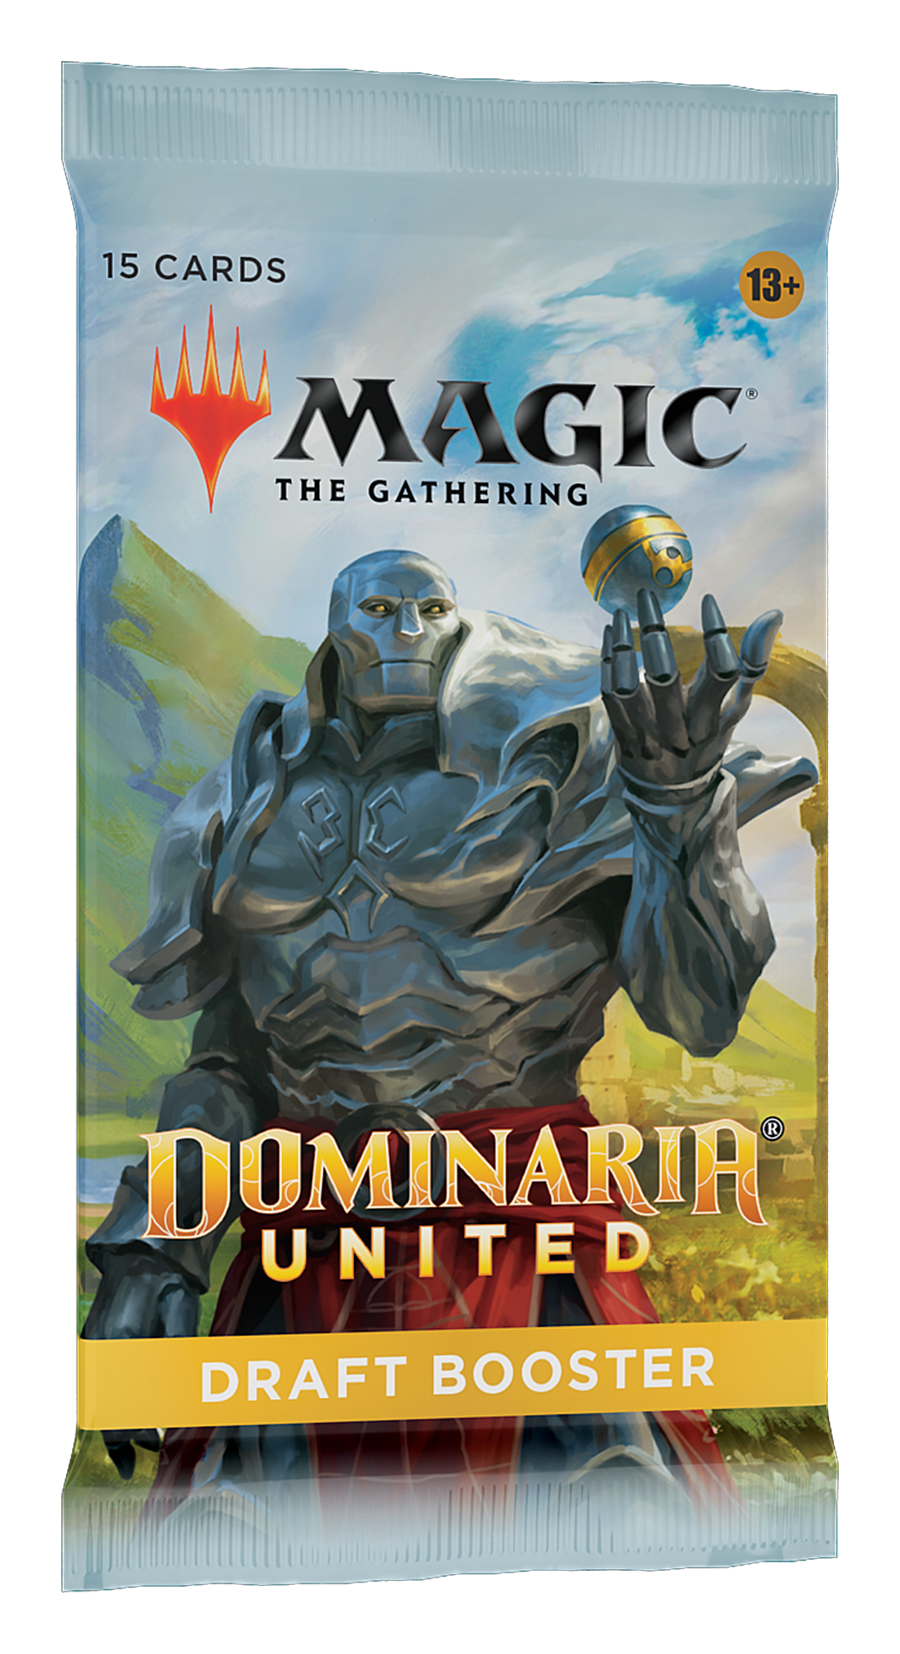 Magic the Gathering: Dominaria United Draft Booster Pack